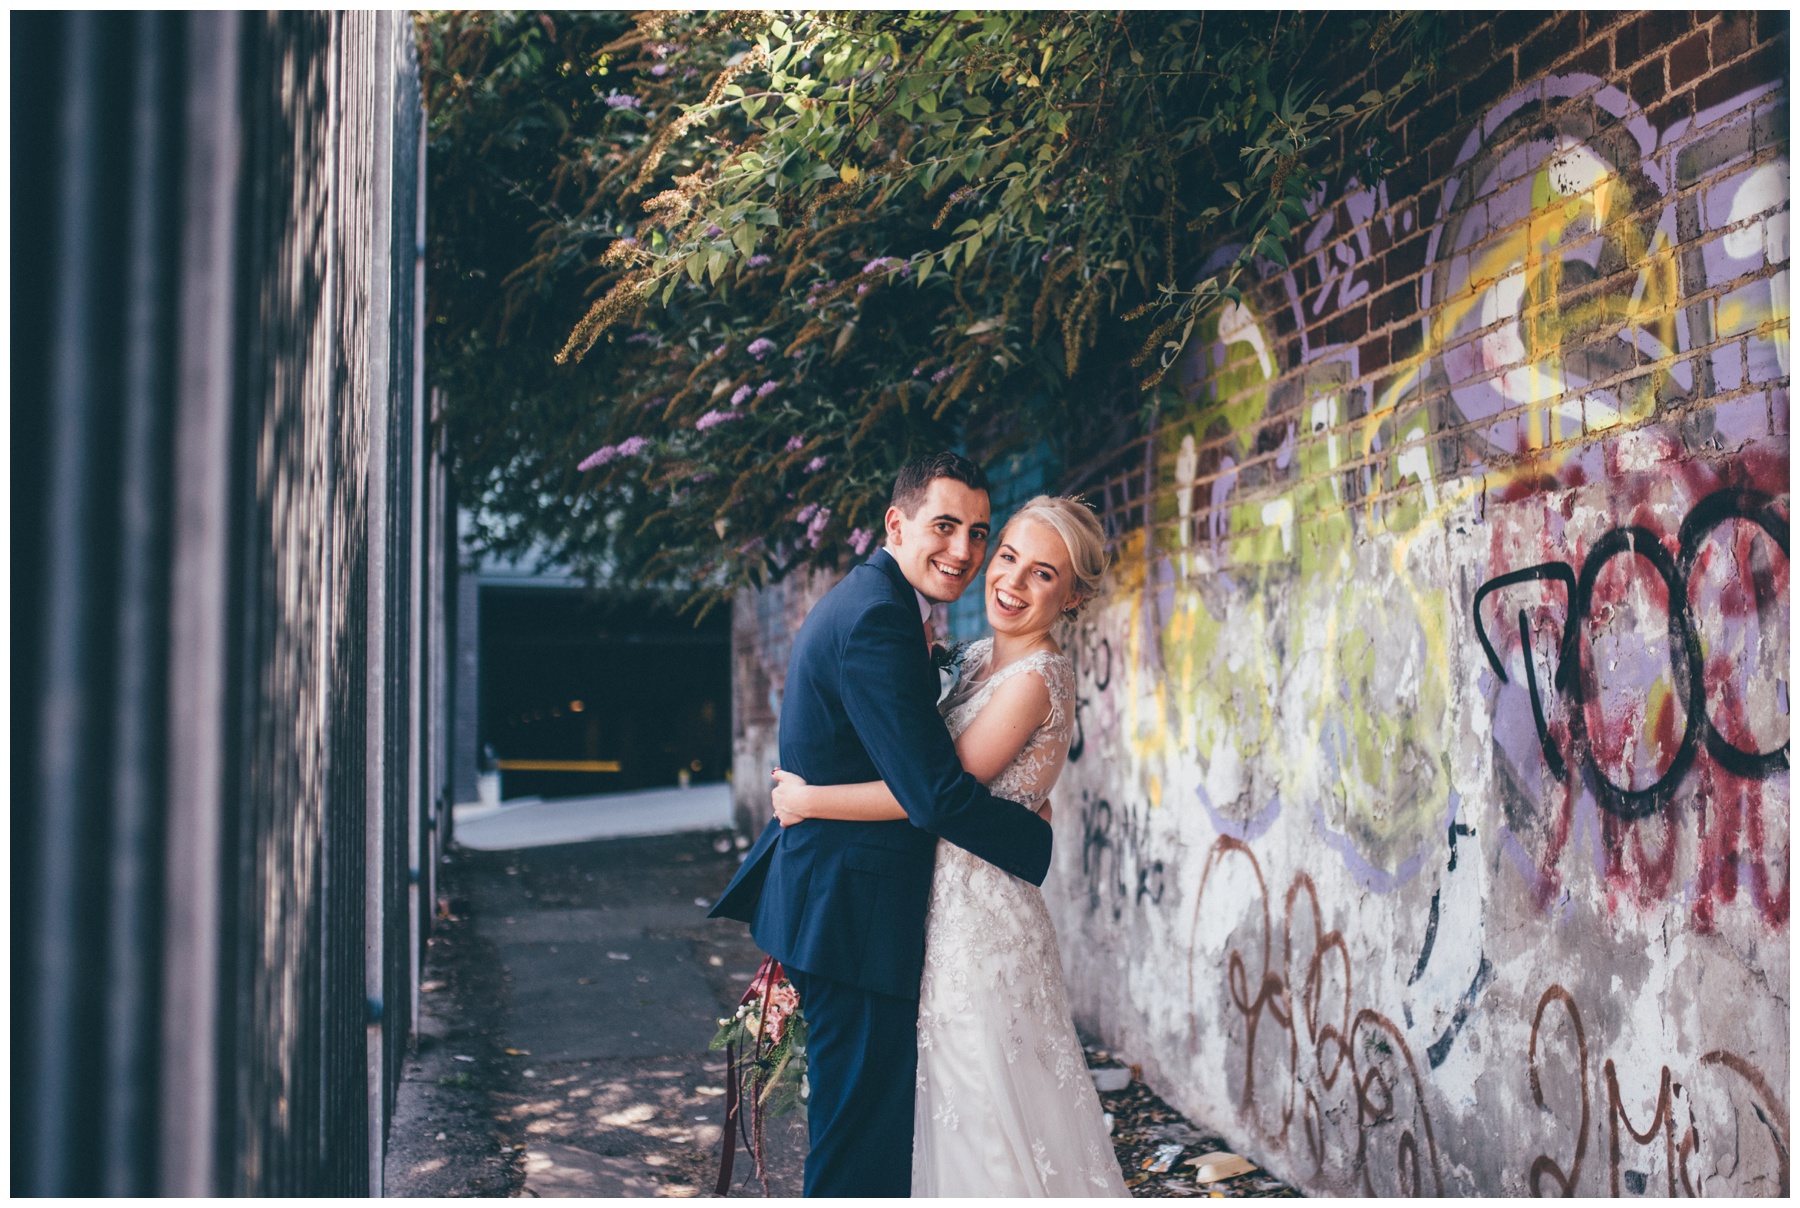 Graffiti covered car park and streets in Sheffield city centre wedding make a great back-drop for bride and groom.